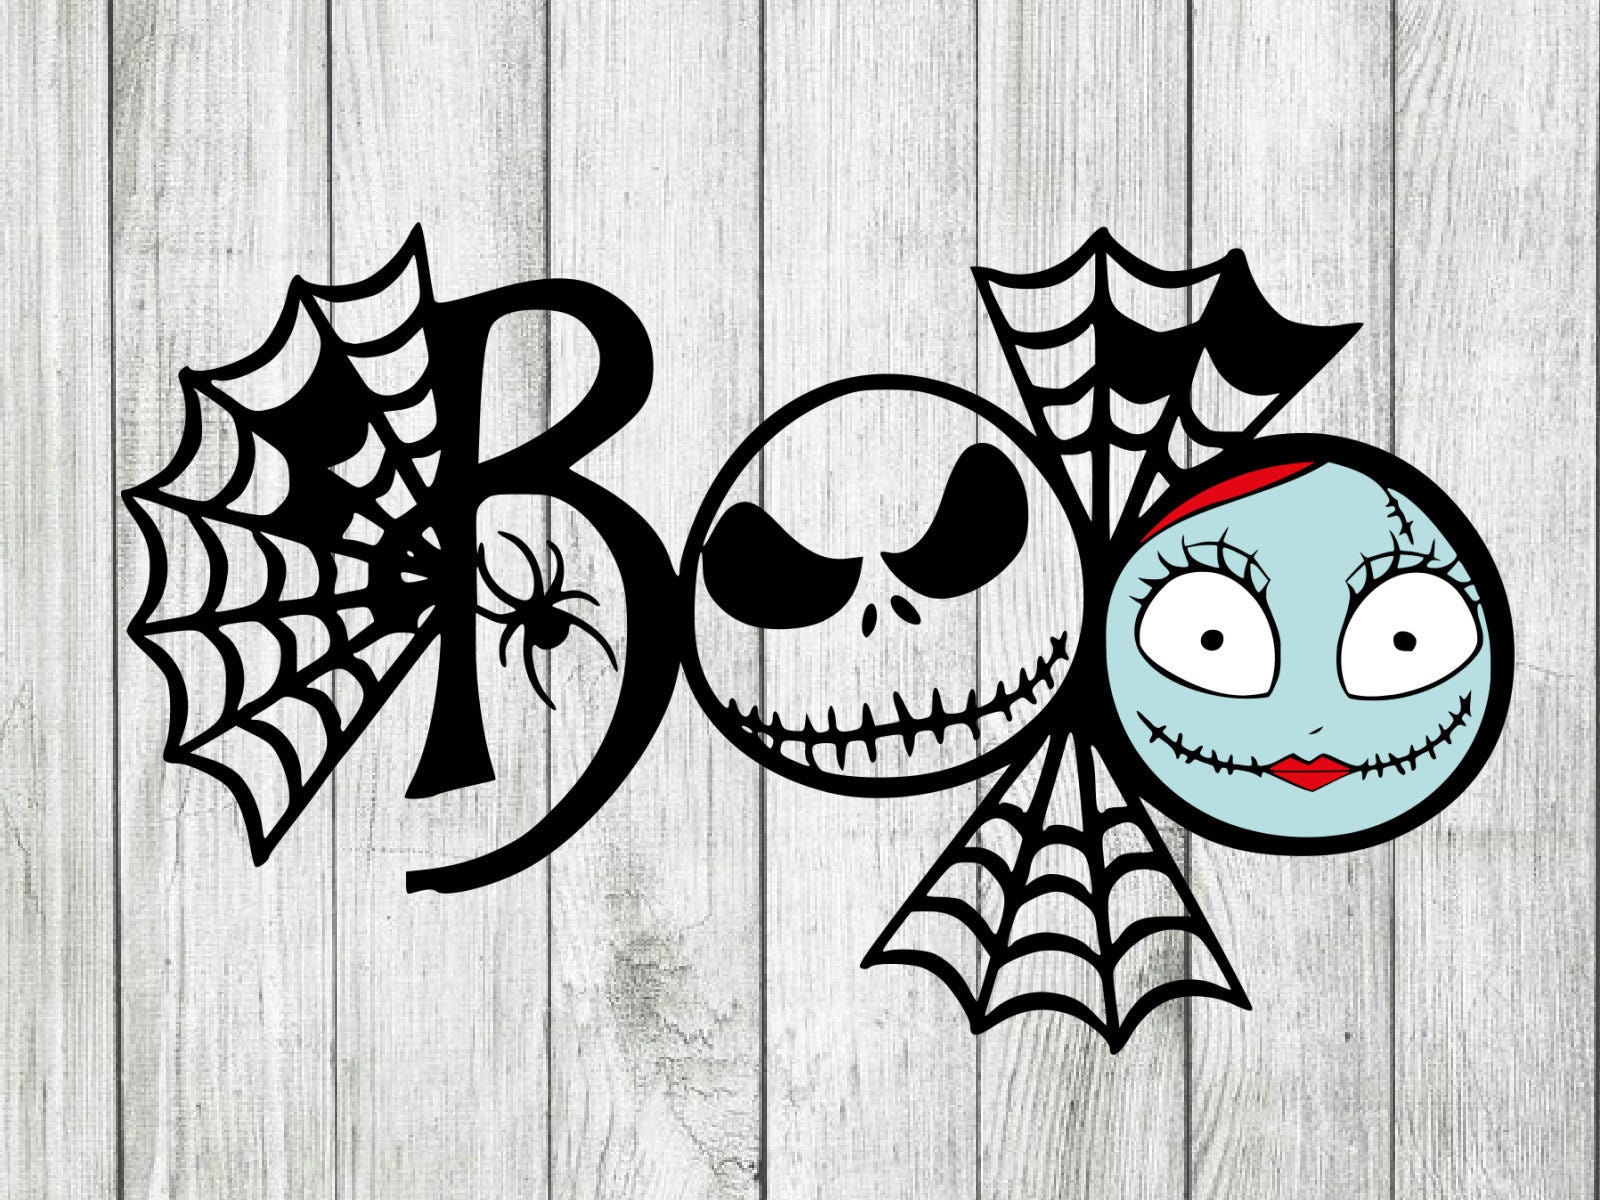 Jack and sally svg, jack skellington svg, A nightmare before christmas svg, cutting files for cricut silhouette, INSTANT DOWNLOAD